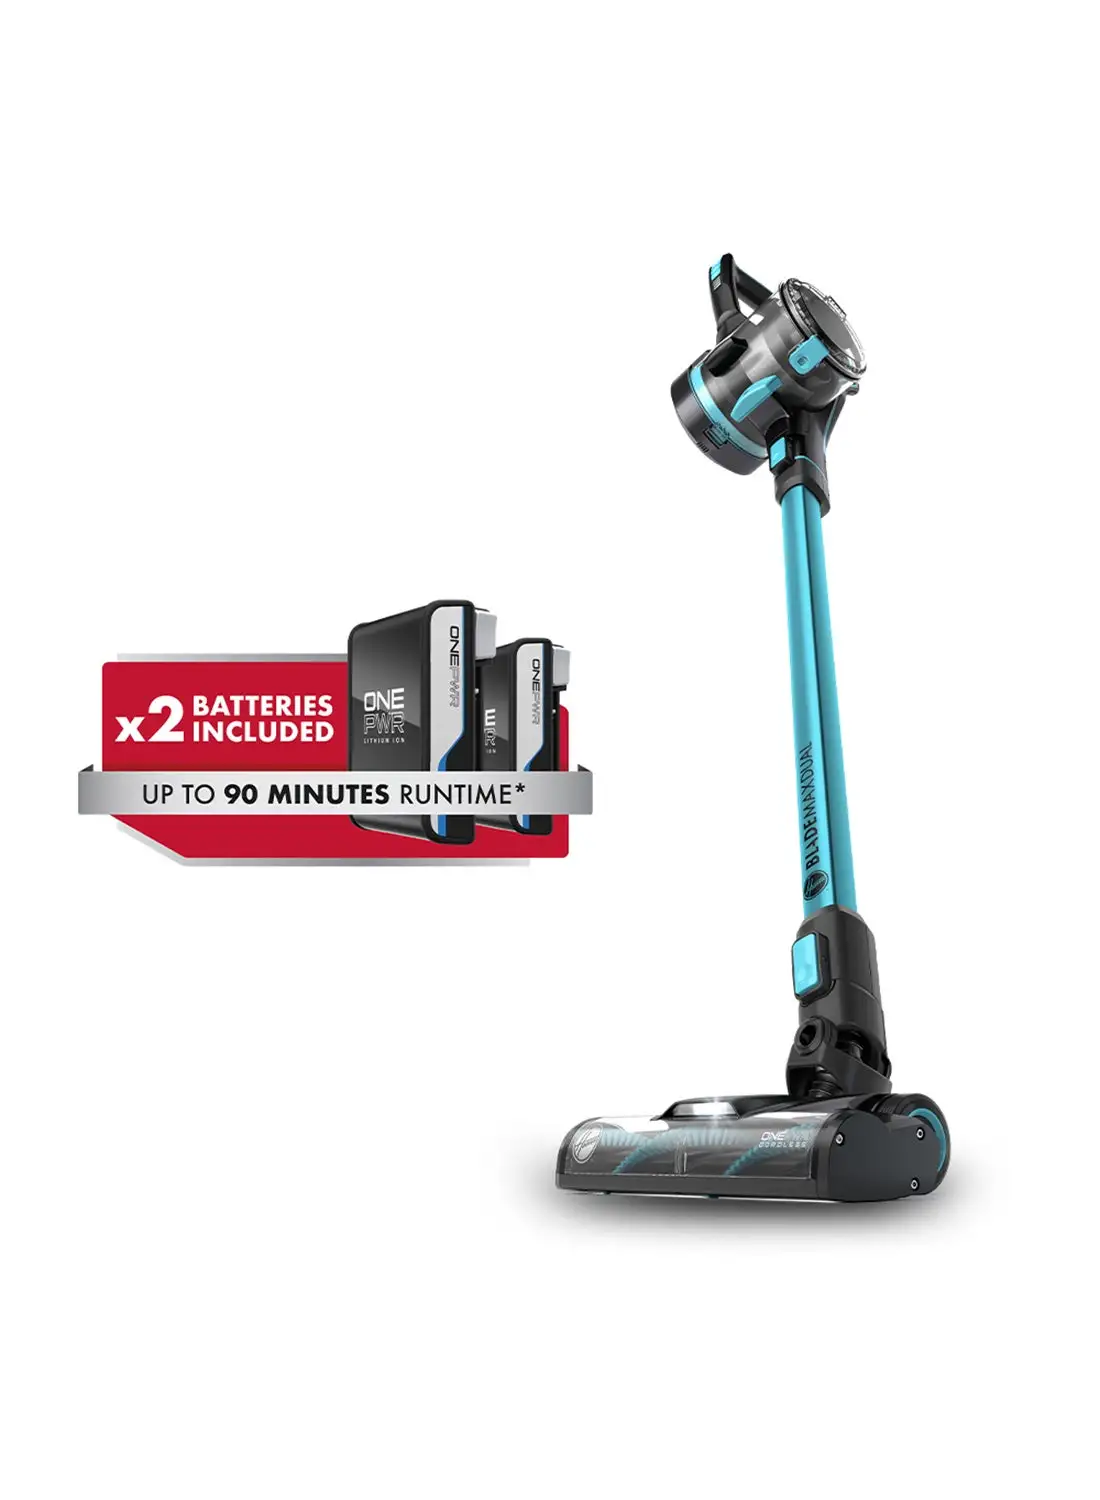 HOOVER One Power Blade Max Dual Cordless Stick Vacuum Cleaner 6 W CLSV-BPME Black/Blue